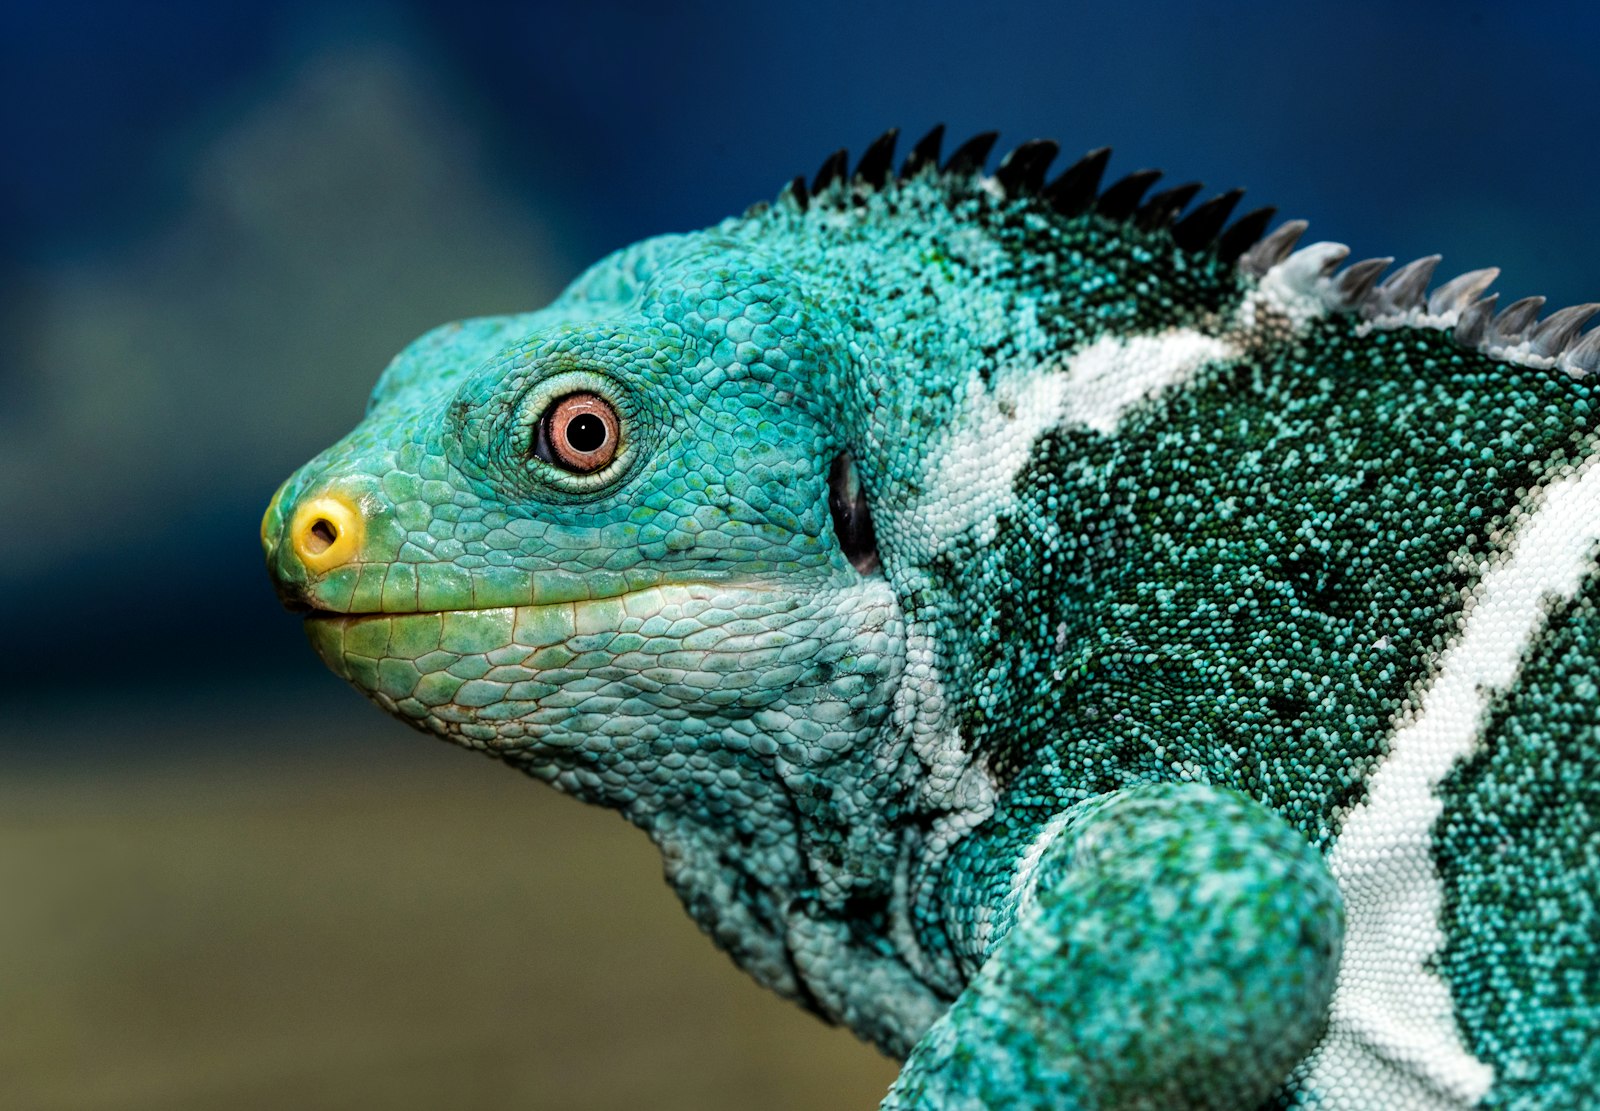 Nikon D750 + Tamron SP 90mm F2.8 Di VC USD 1:1 Macro (F004) sample photo. Teal and white chameleon photography